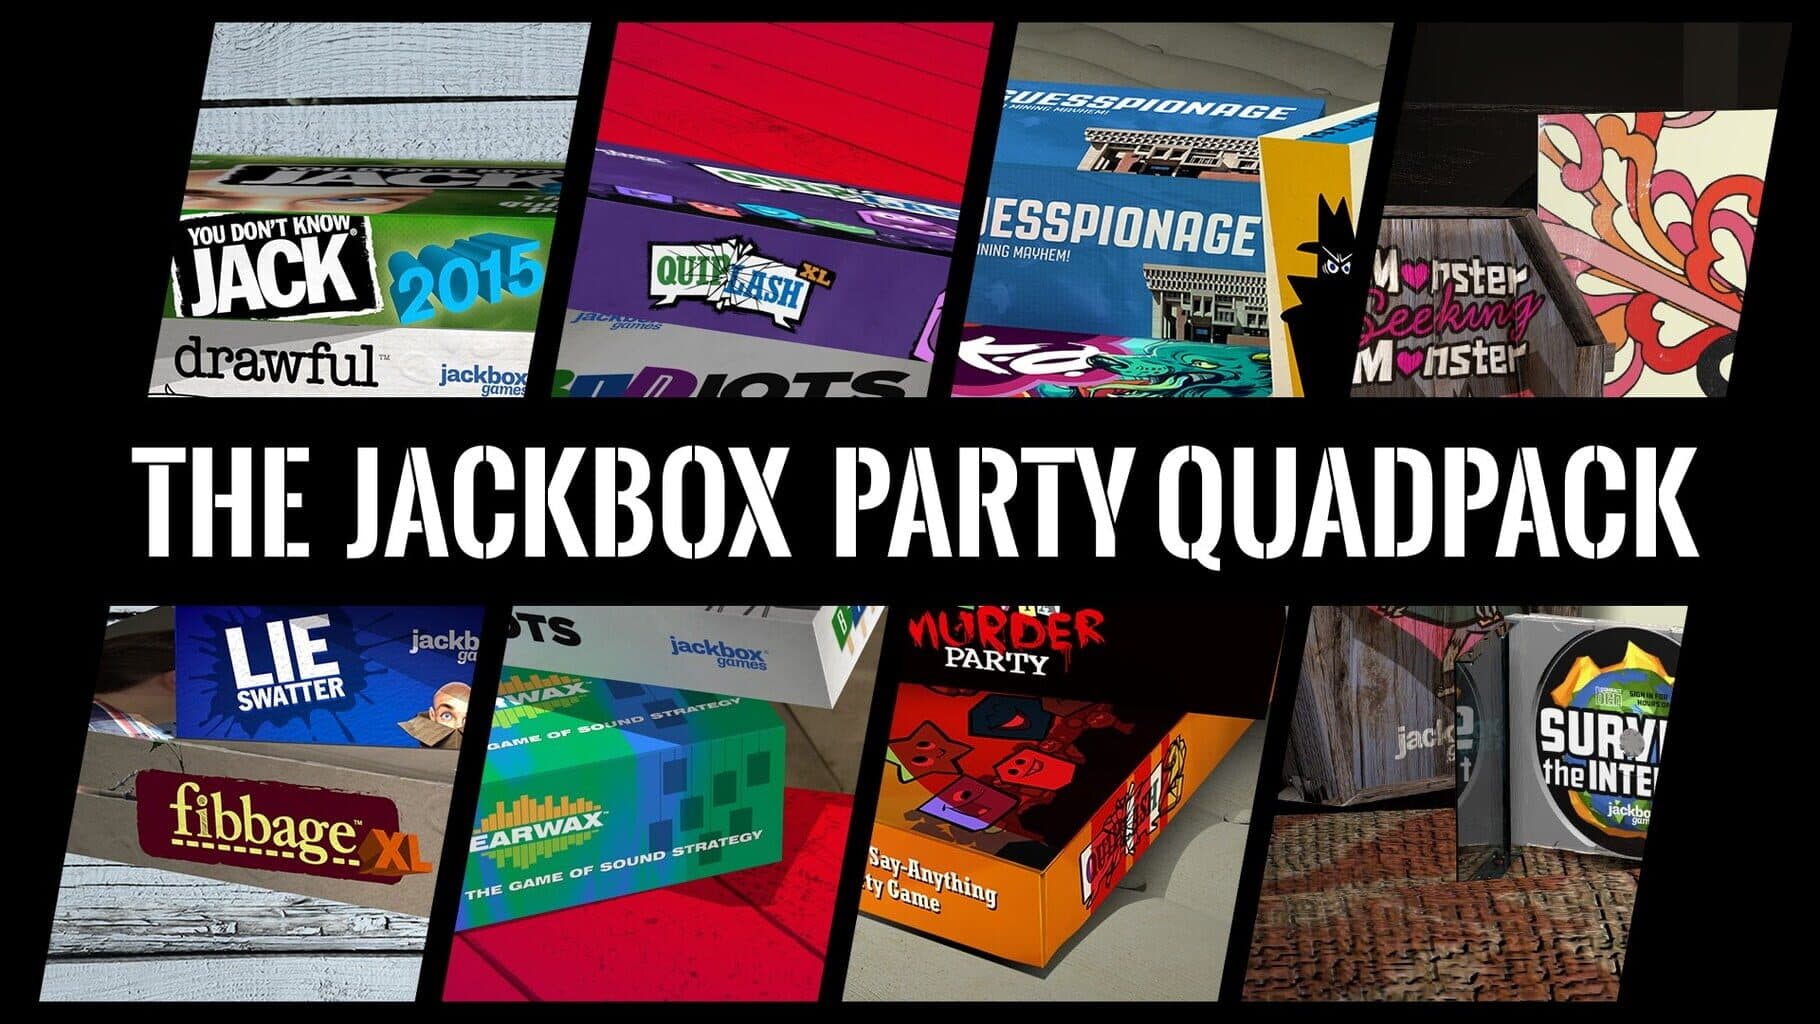 The Jackbox Party Quadpack Image